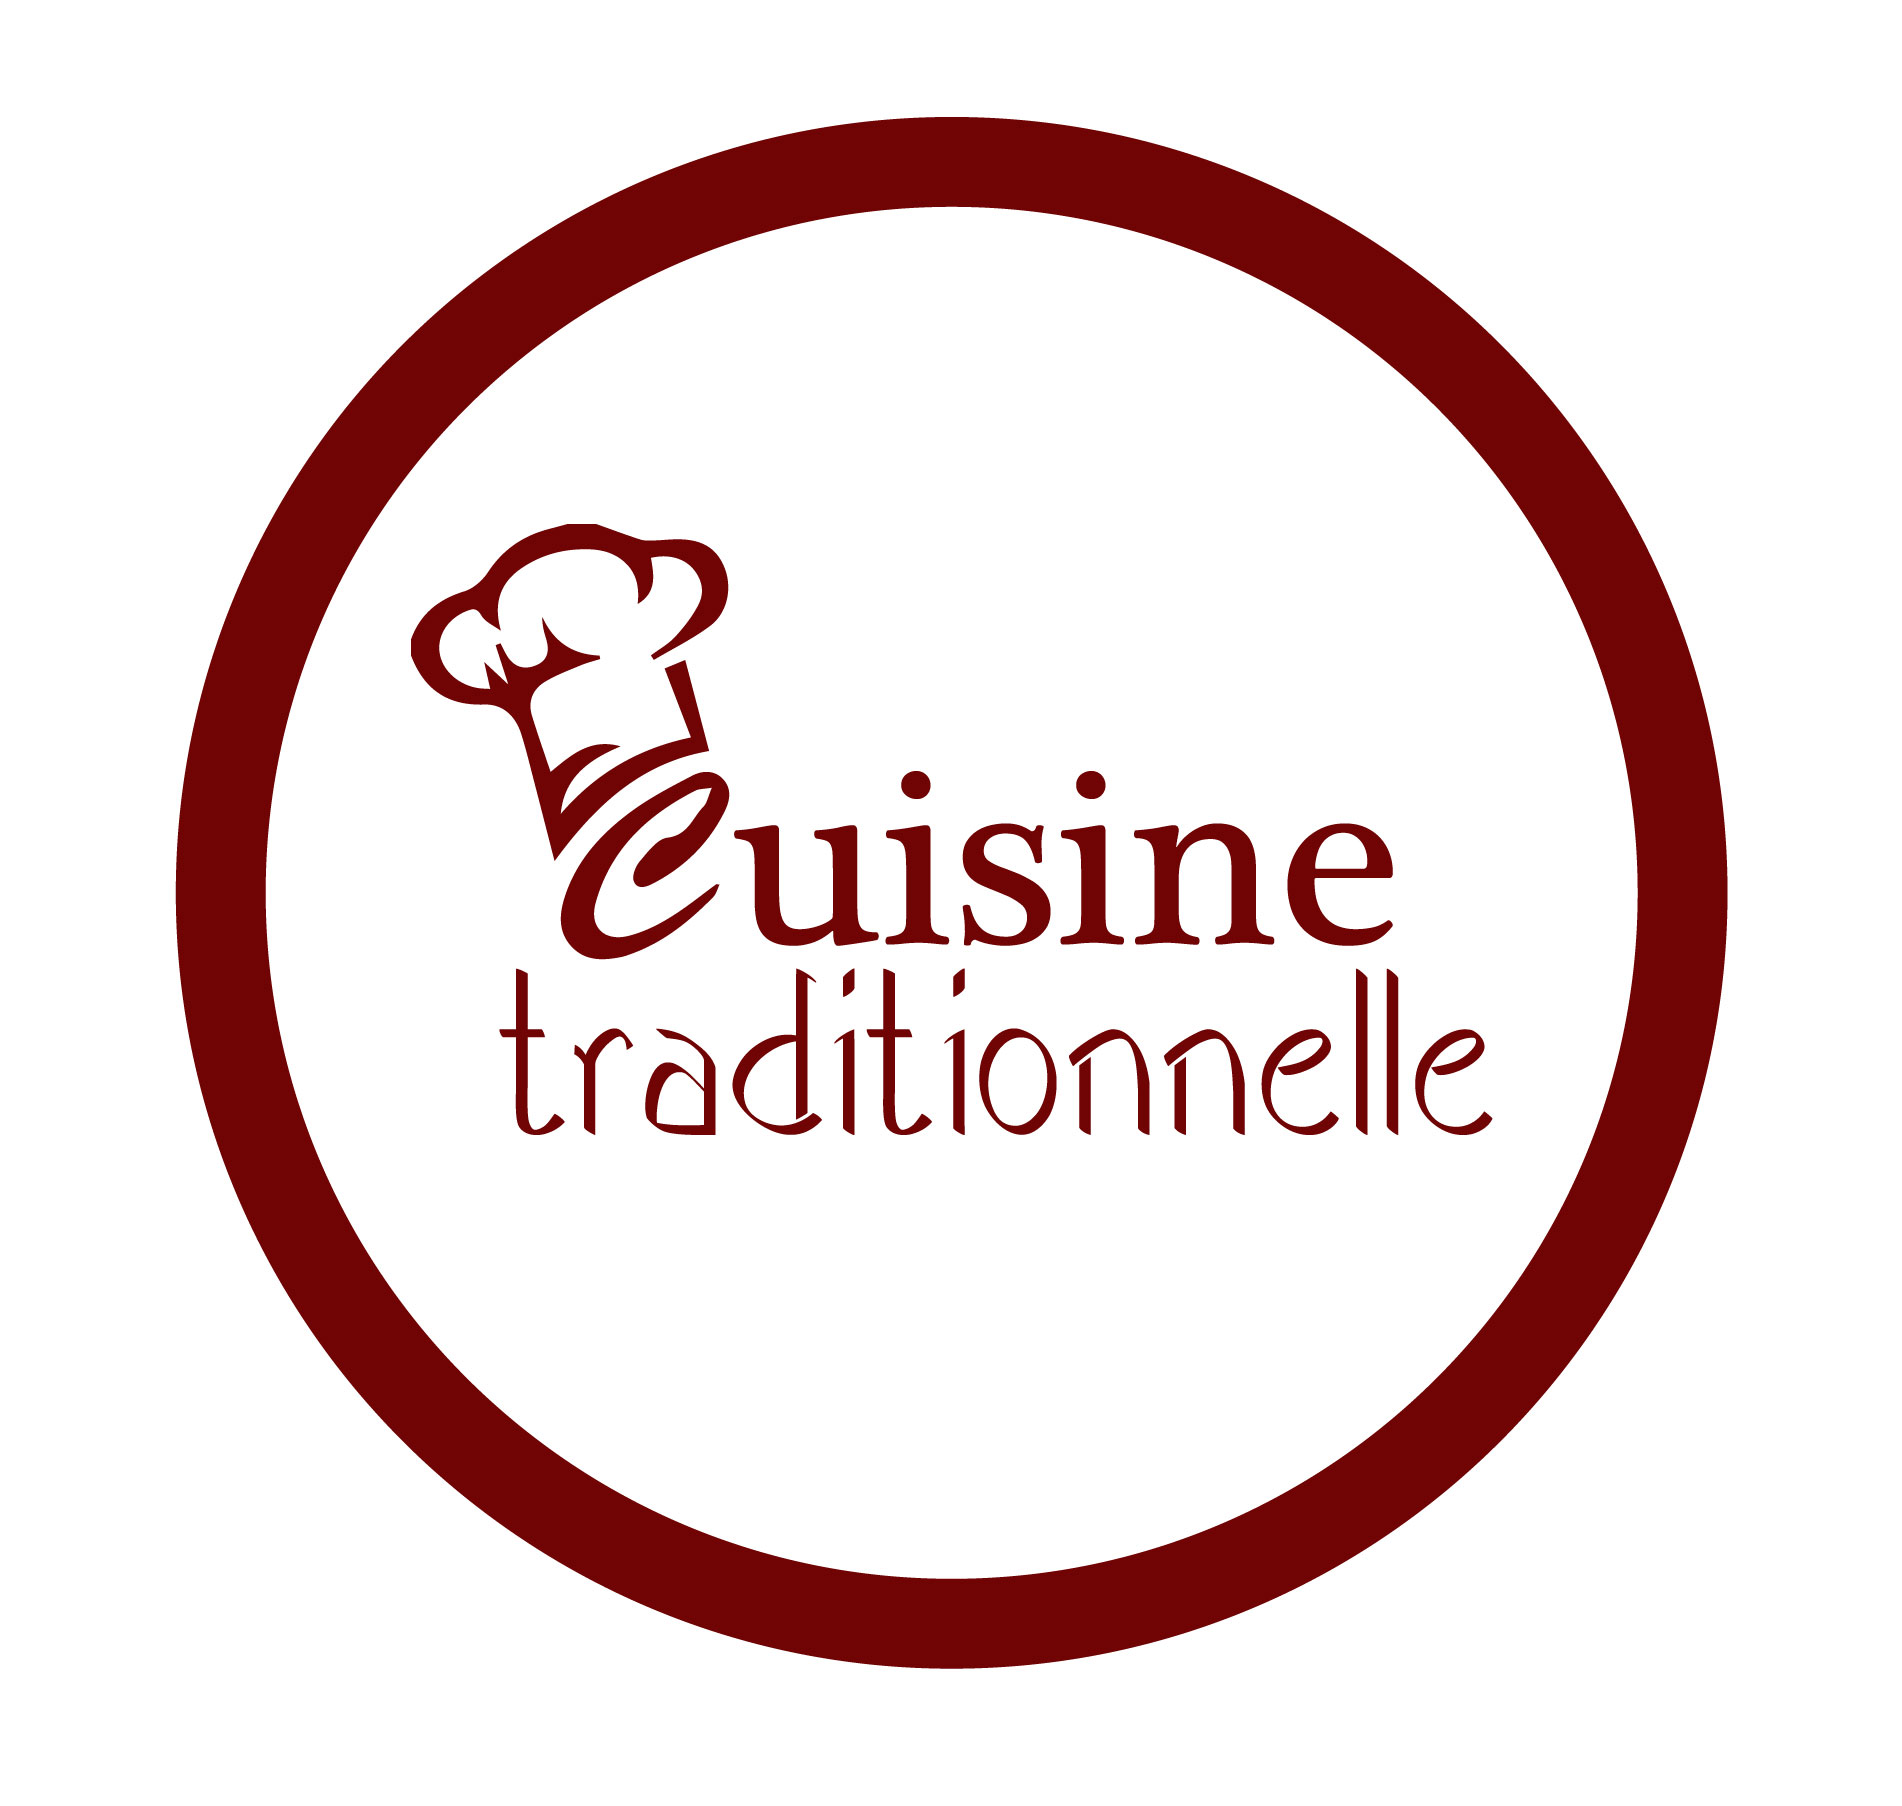 Cuisine traditionnelle